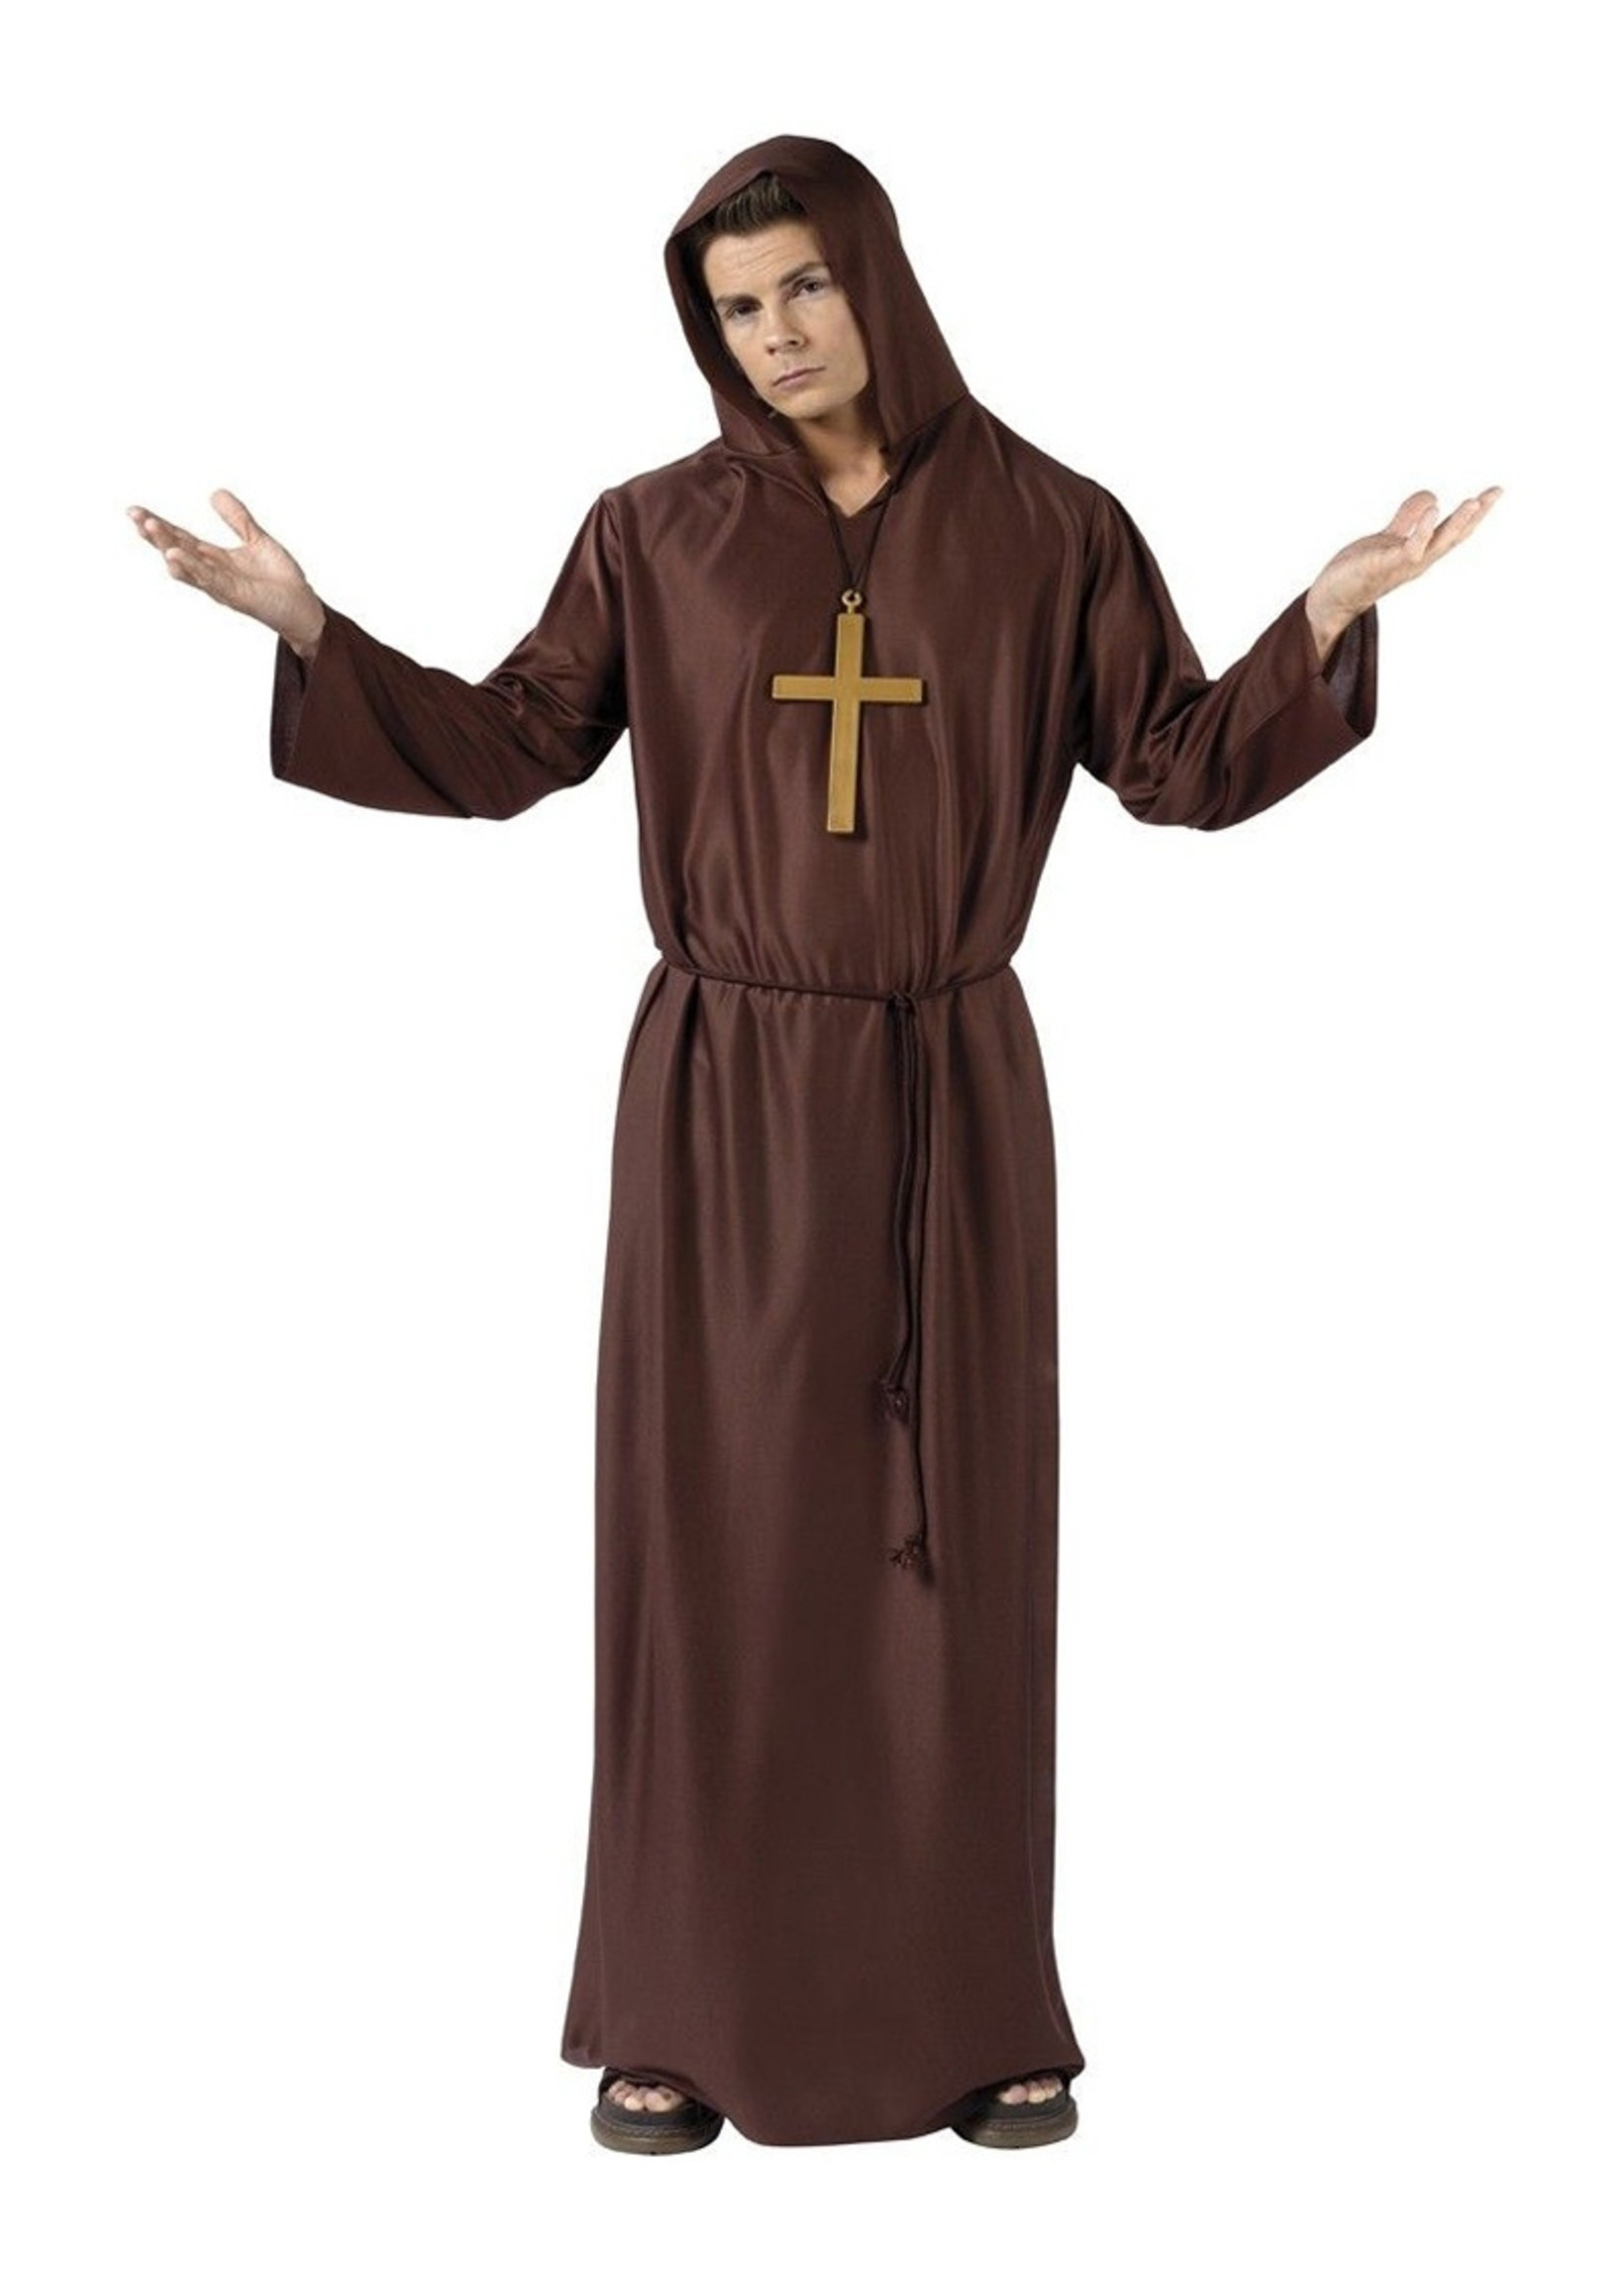 Monk Costume - Men's - Party On!